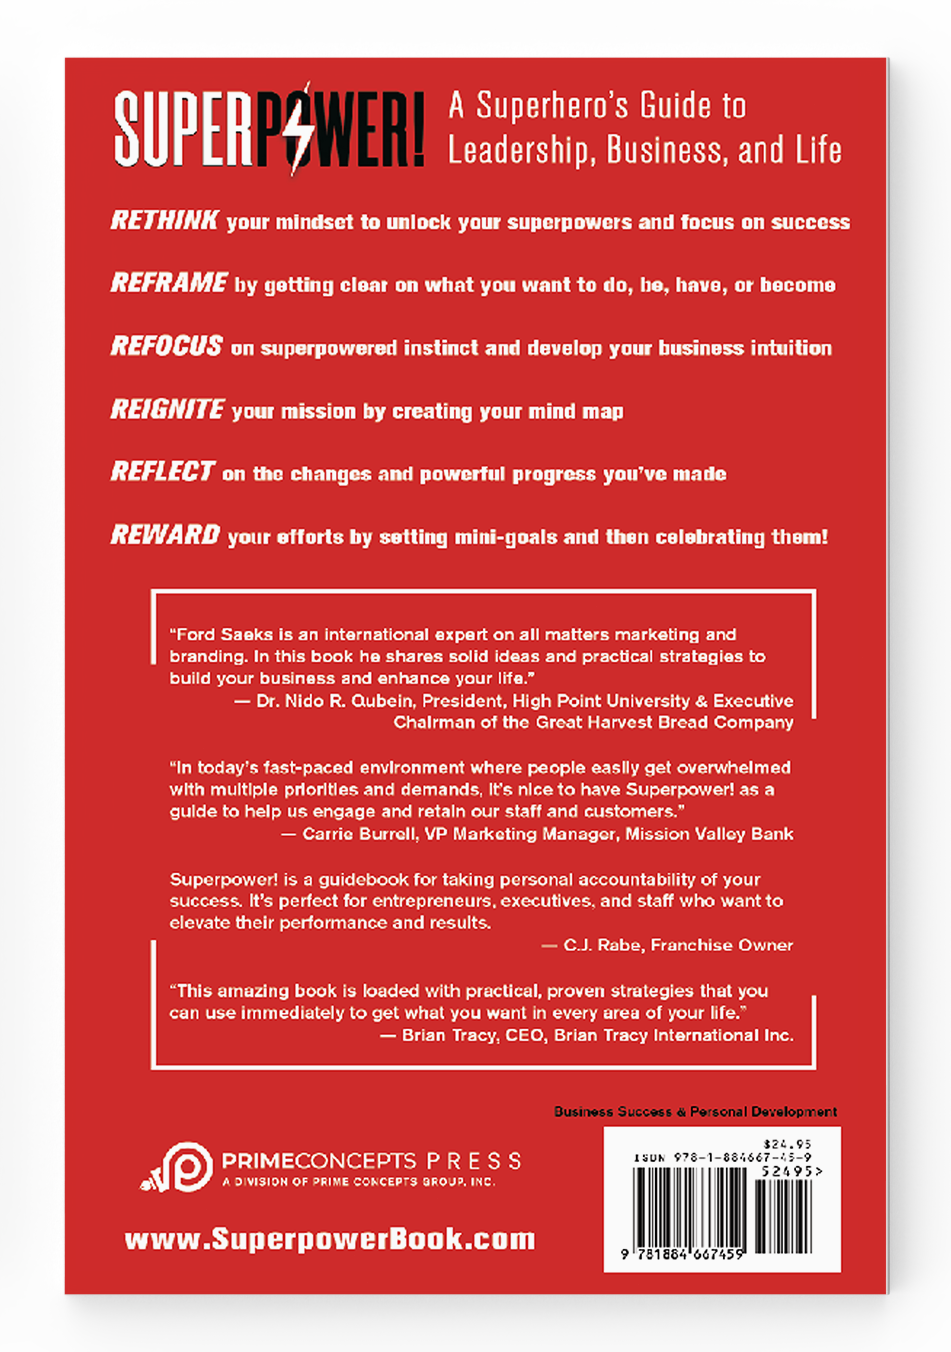 Superpower Book Back Cover Mockup